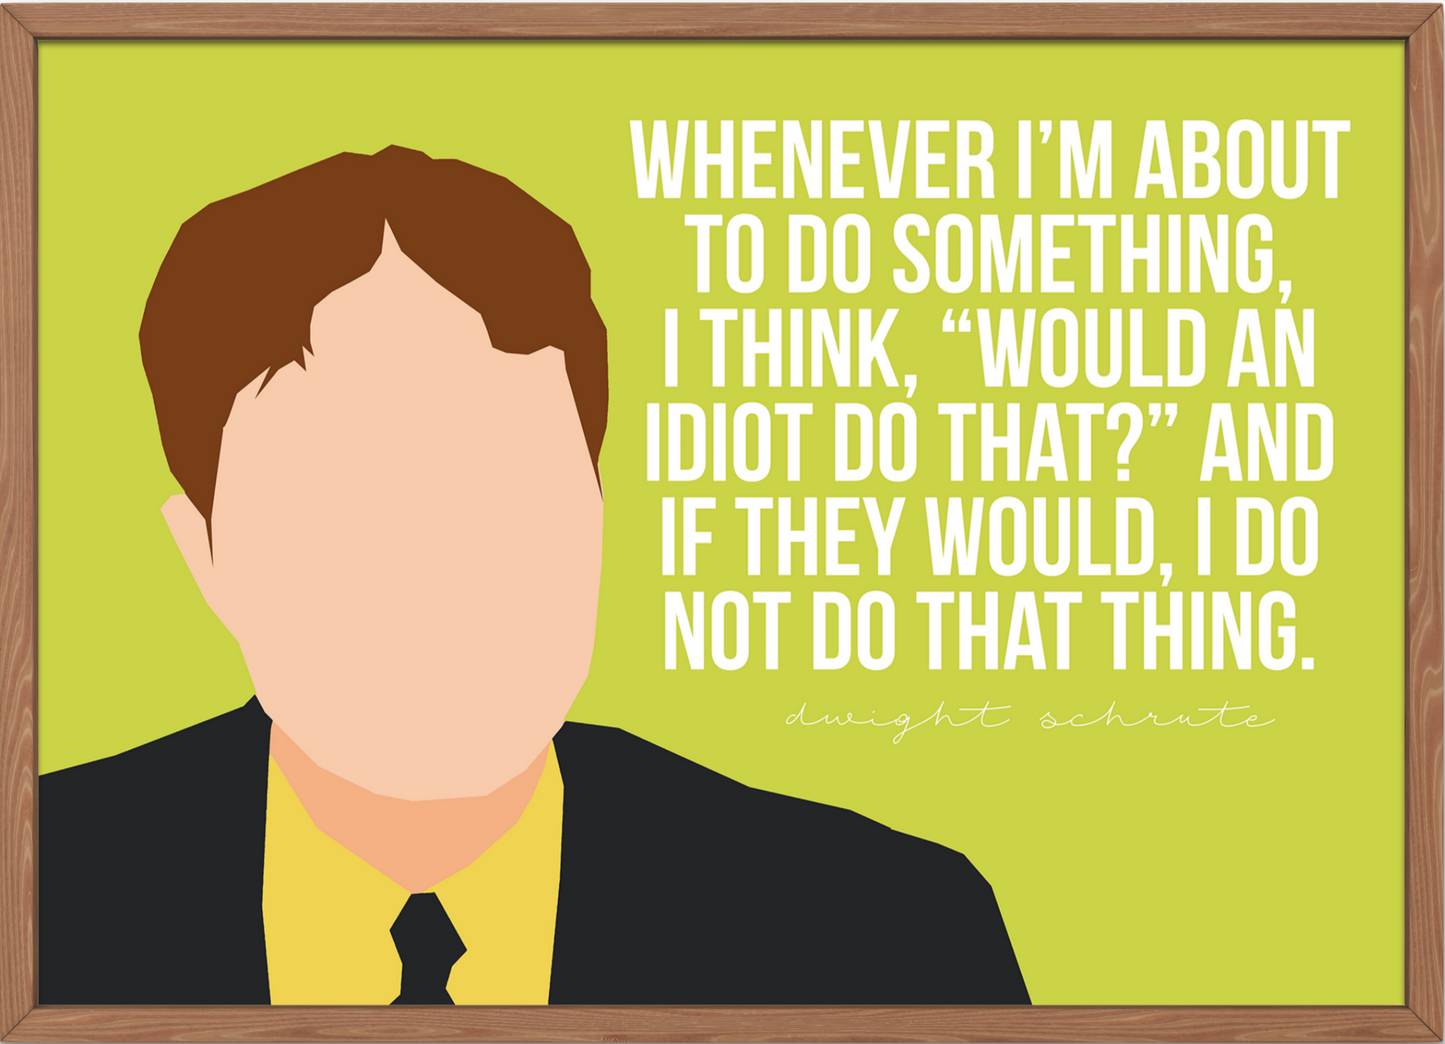 The Office Poster | Dwight Schrute "Would an idiot do that?"